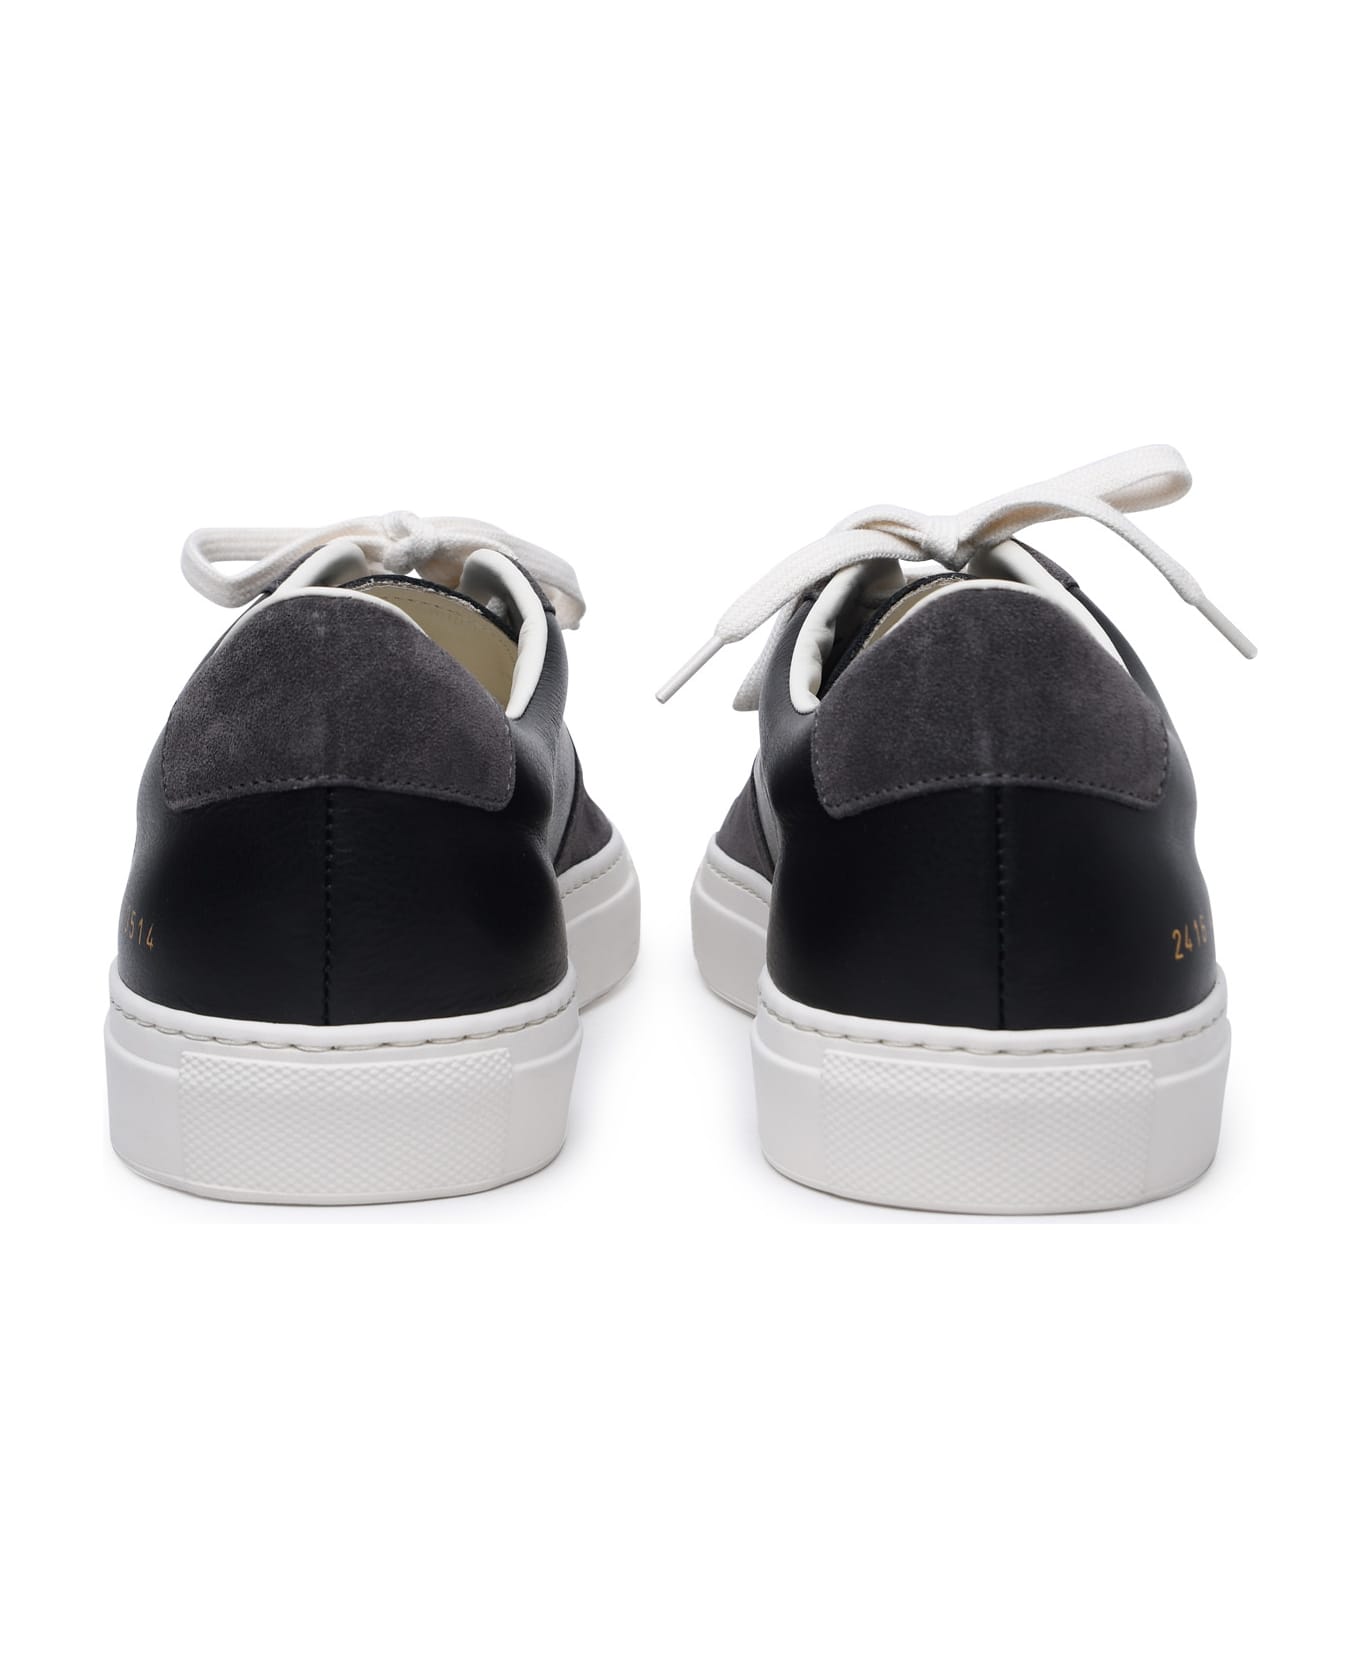 Common Projects 'bball Duo' Black Leather Sneakers - Black スニーカー